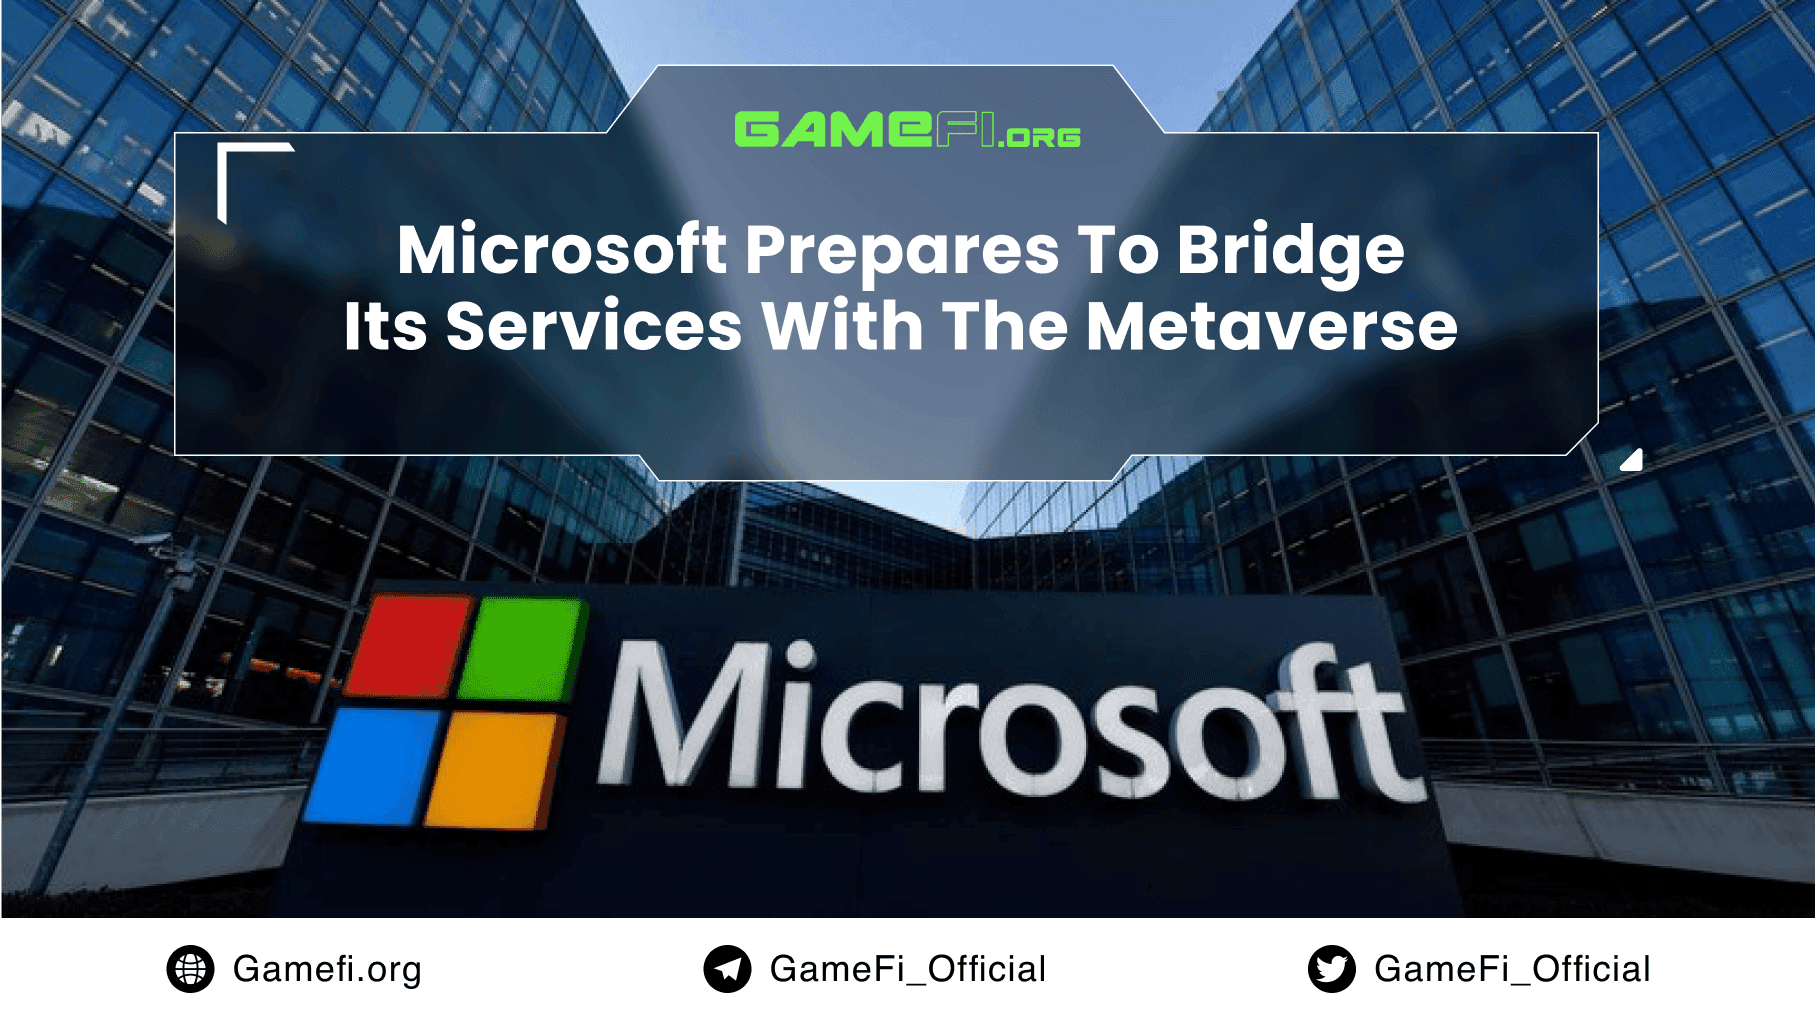 Microsoft Prepares To Bridge Its Services With The Metaverse